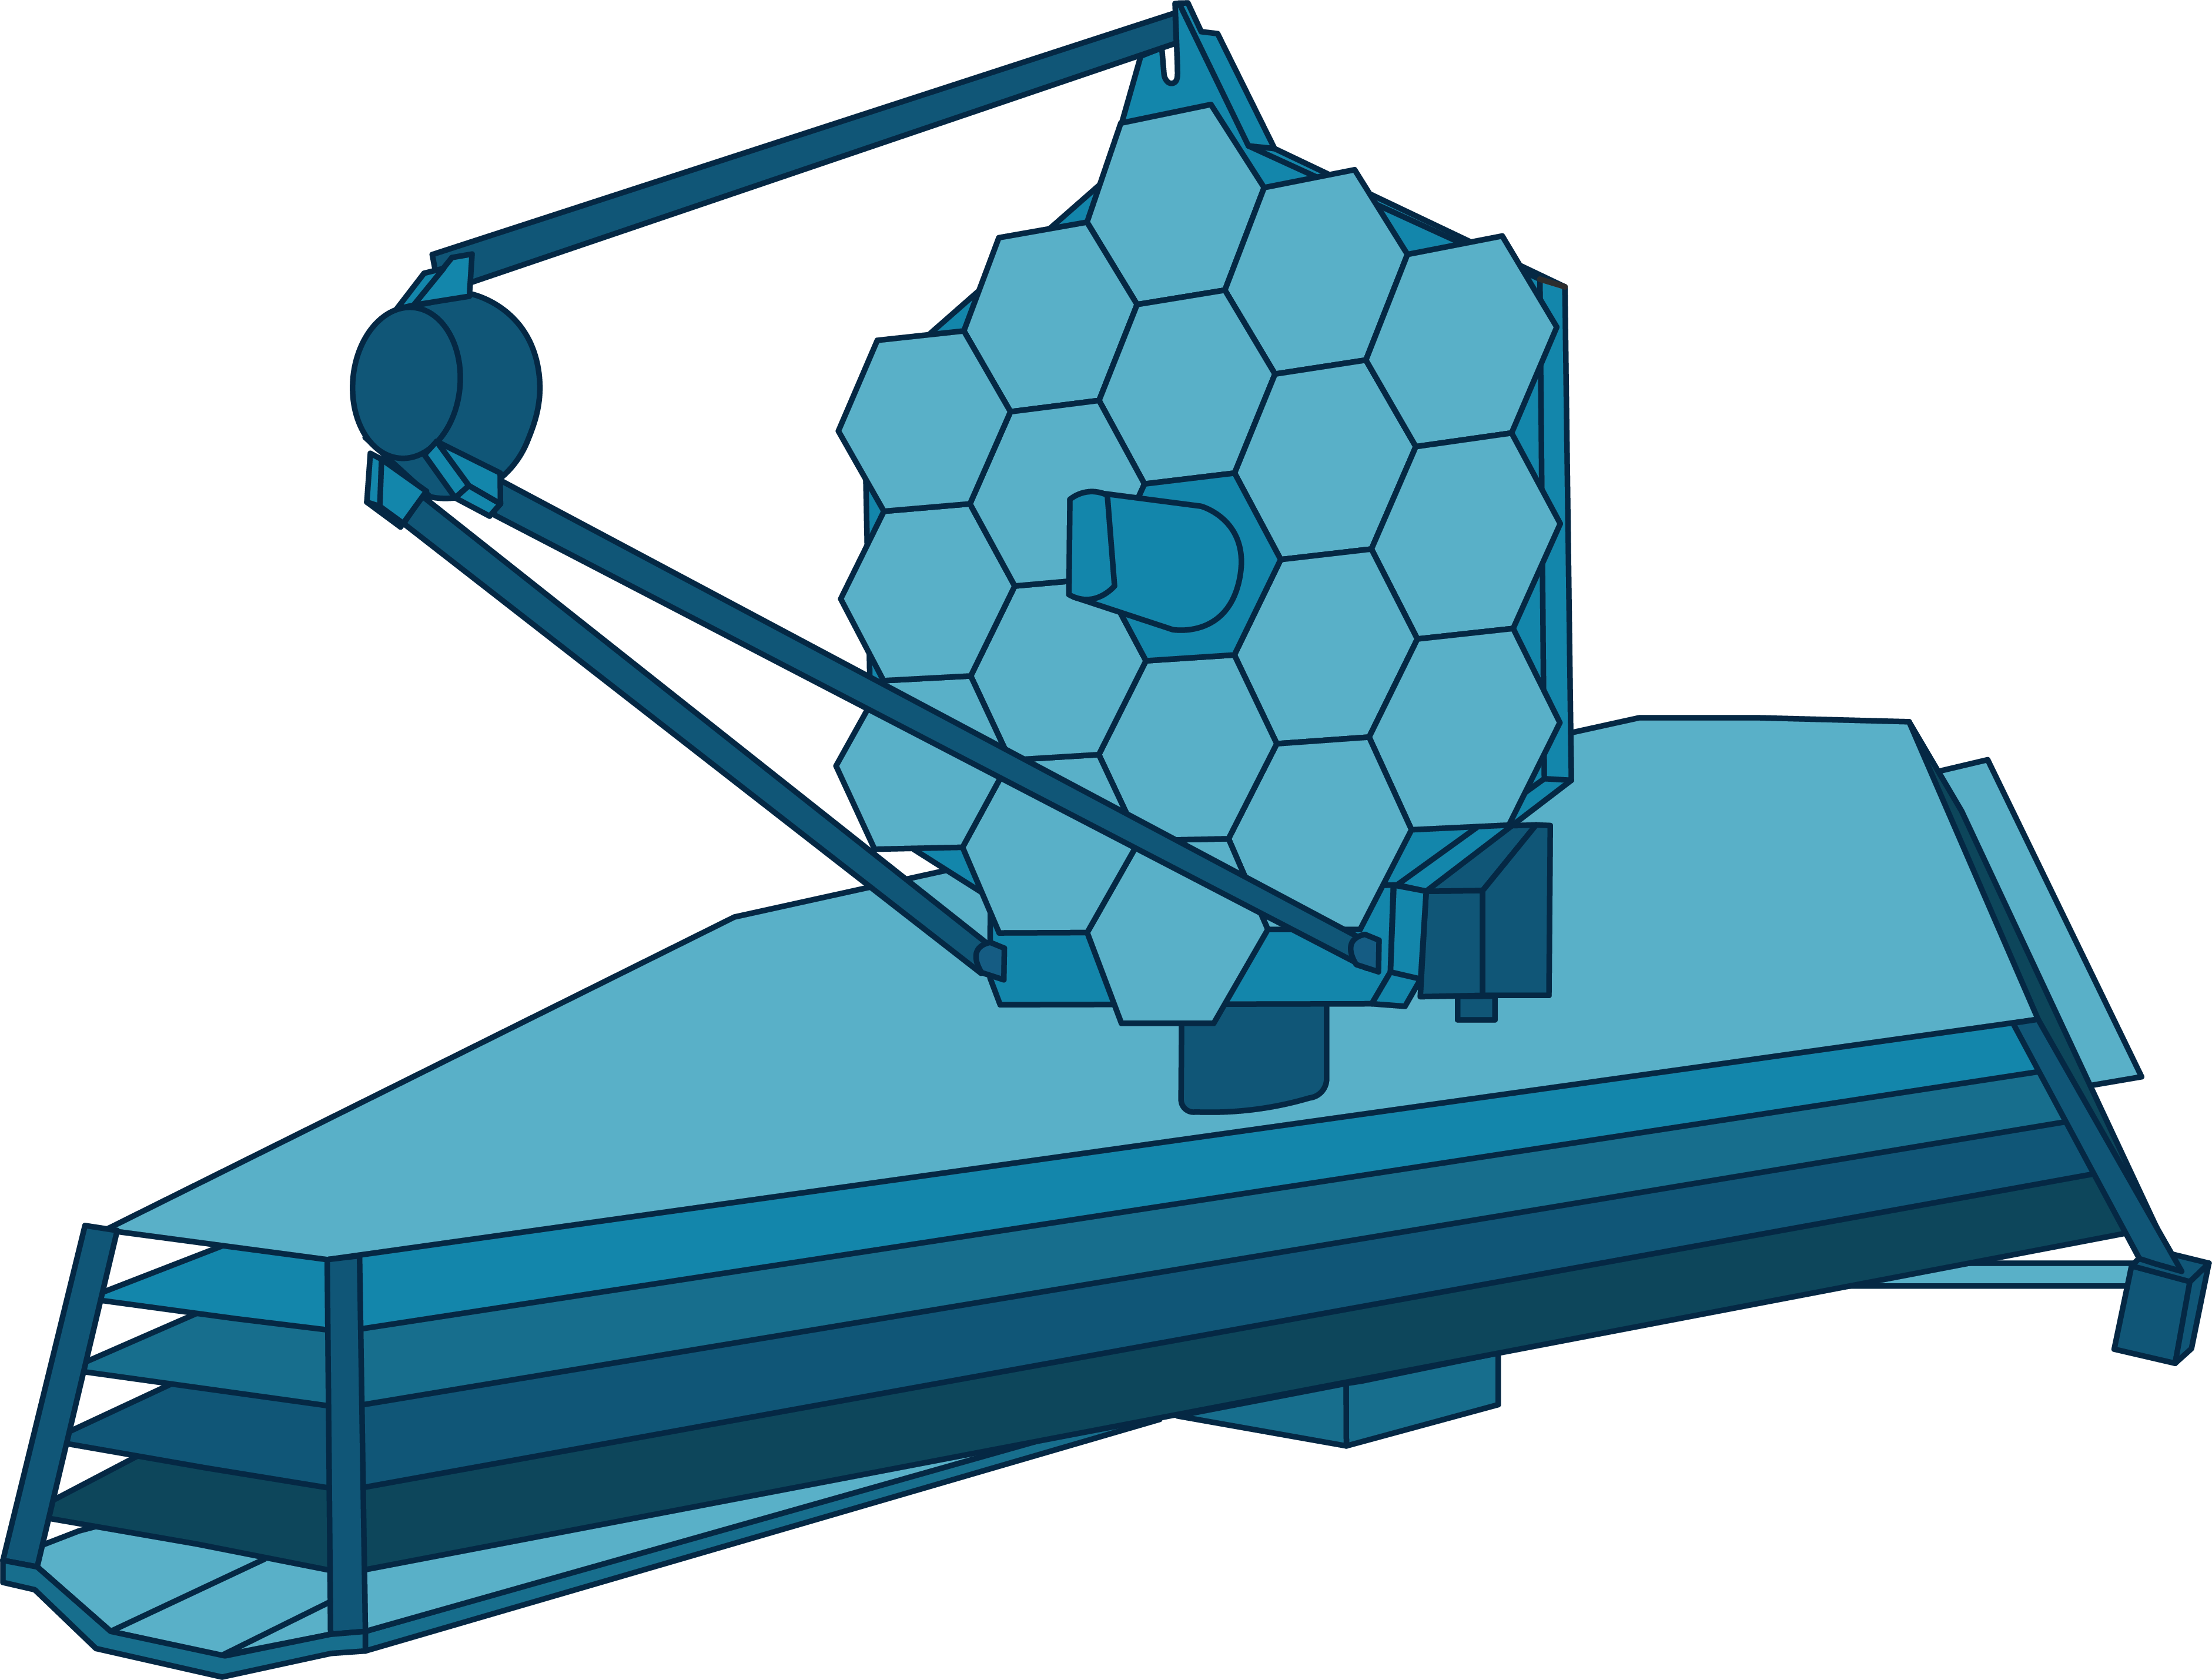 This illustration shows NASA's James Webb Space Telescope in shades of blue. Its base is made up of multiple different layers in an elongated shape. On top of the base sits the observatory's primary mirror which is a large hexagonal shape made up of smaller hexagons. Two rods at the base and one at the top protrude forward and all connect to a small disc, shaped object.